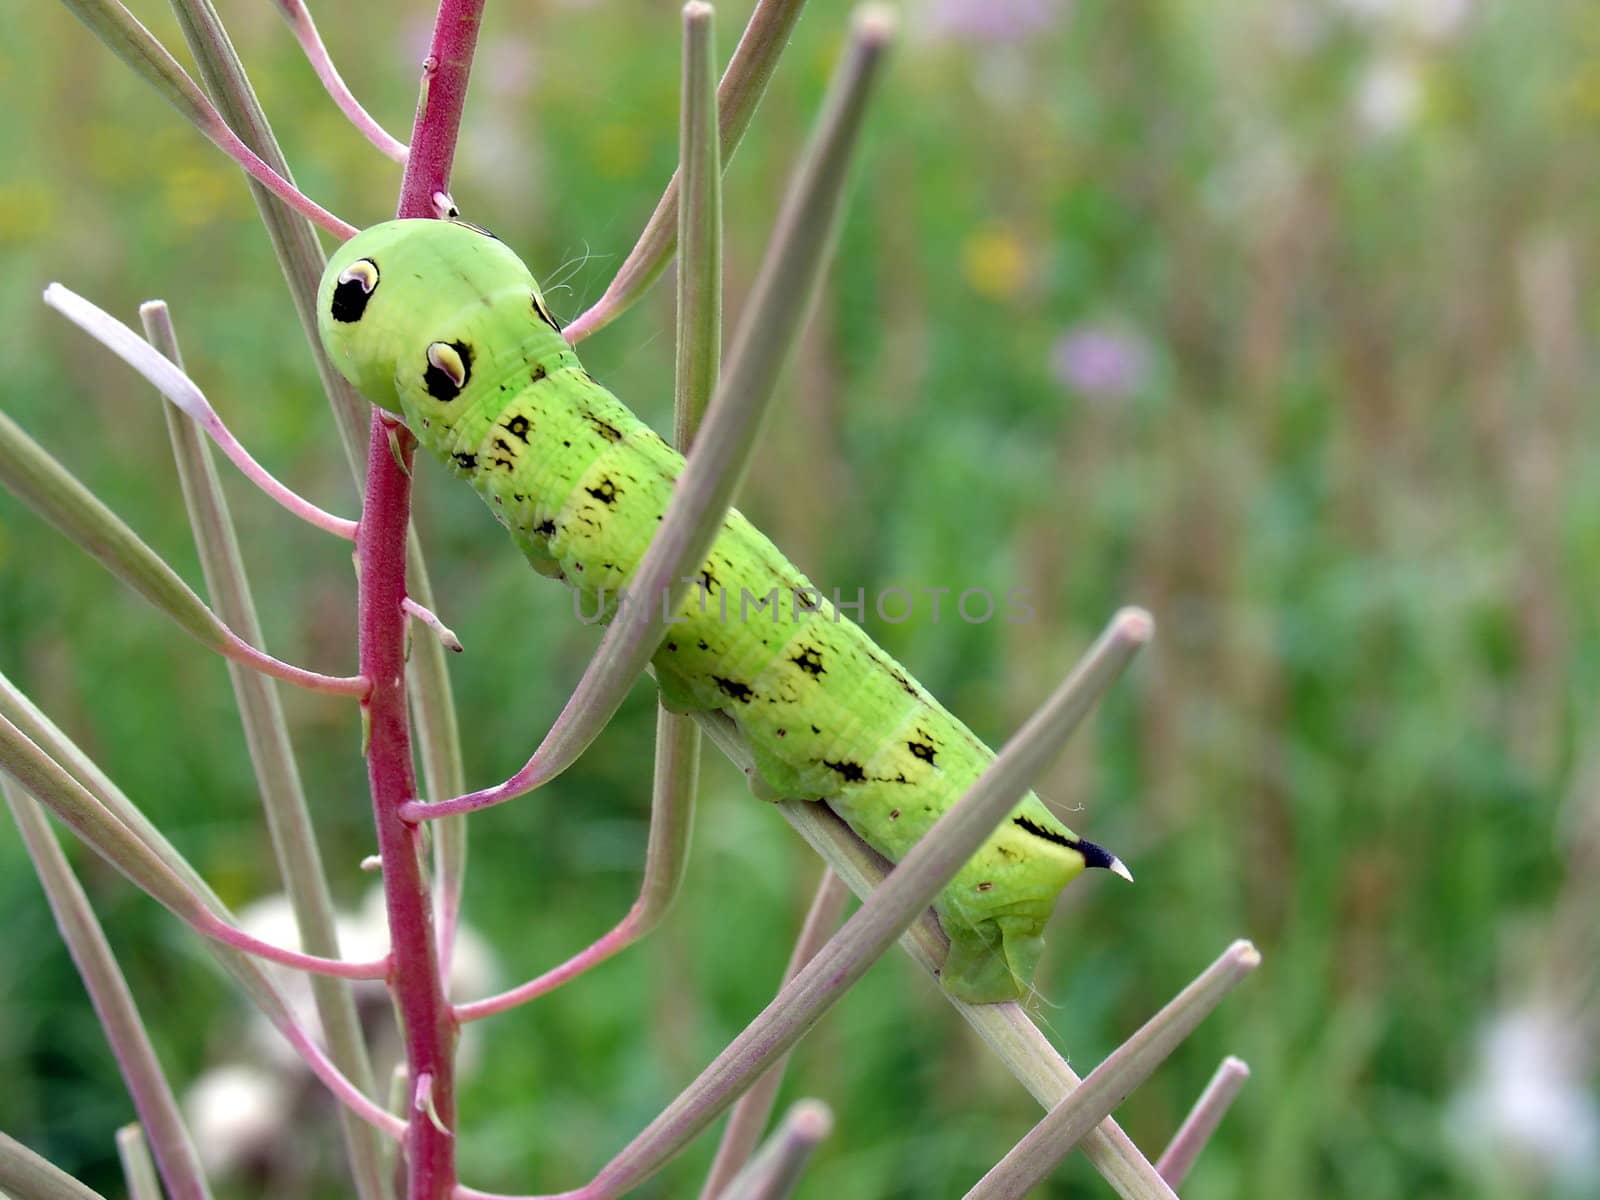 Unusual green caterpillar on the red plant